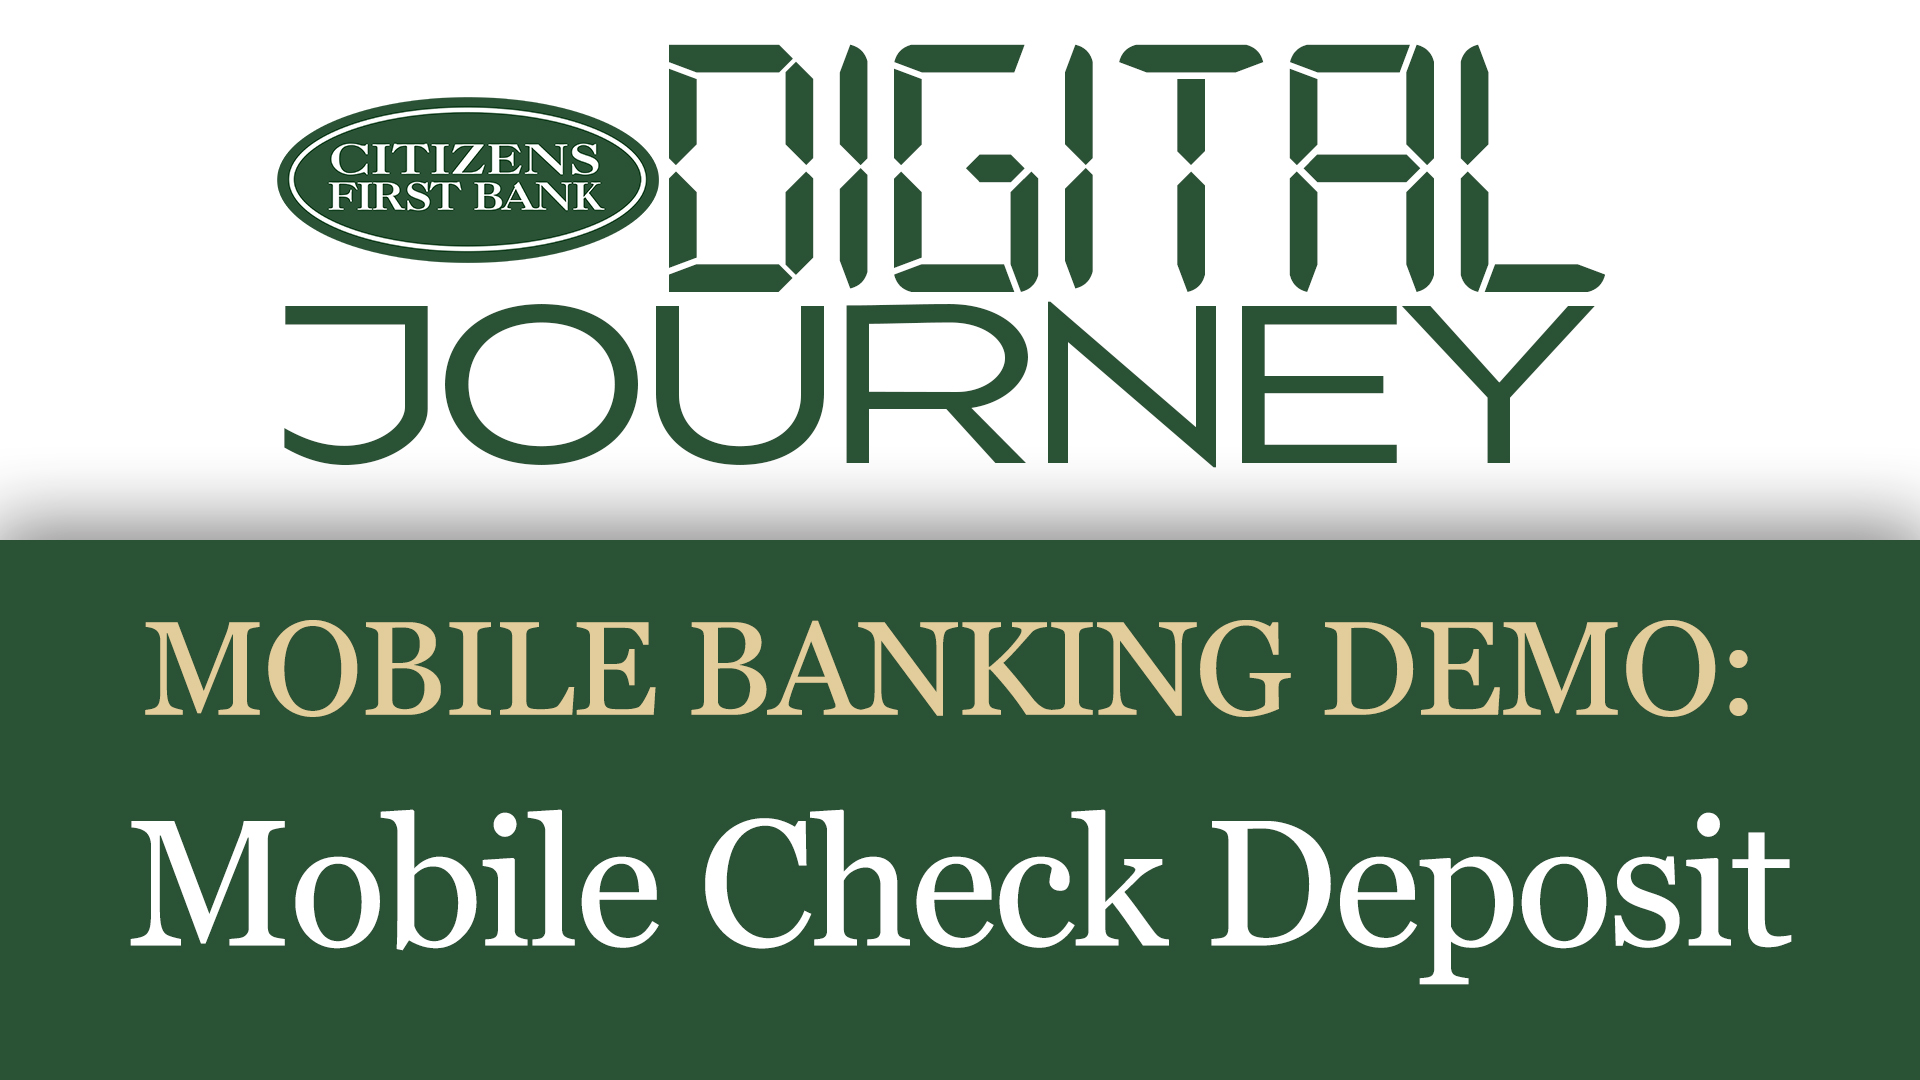 Digital Journey logo with our mobile banking demo: Mobile Check Deposit